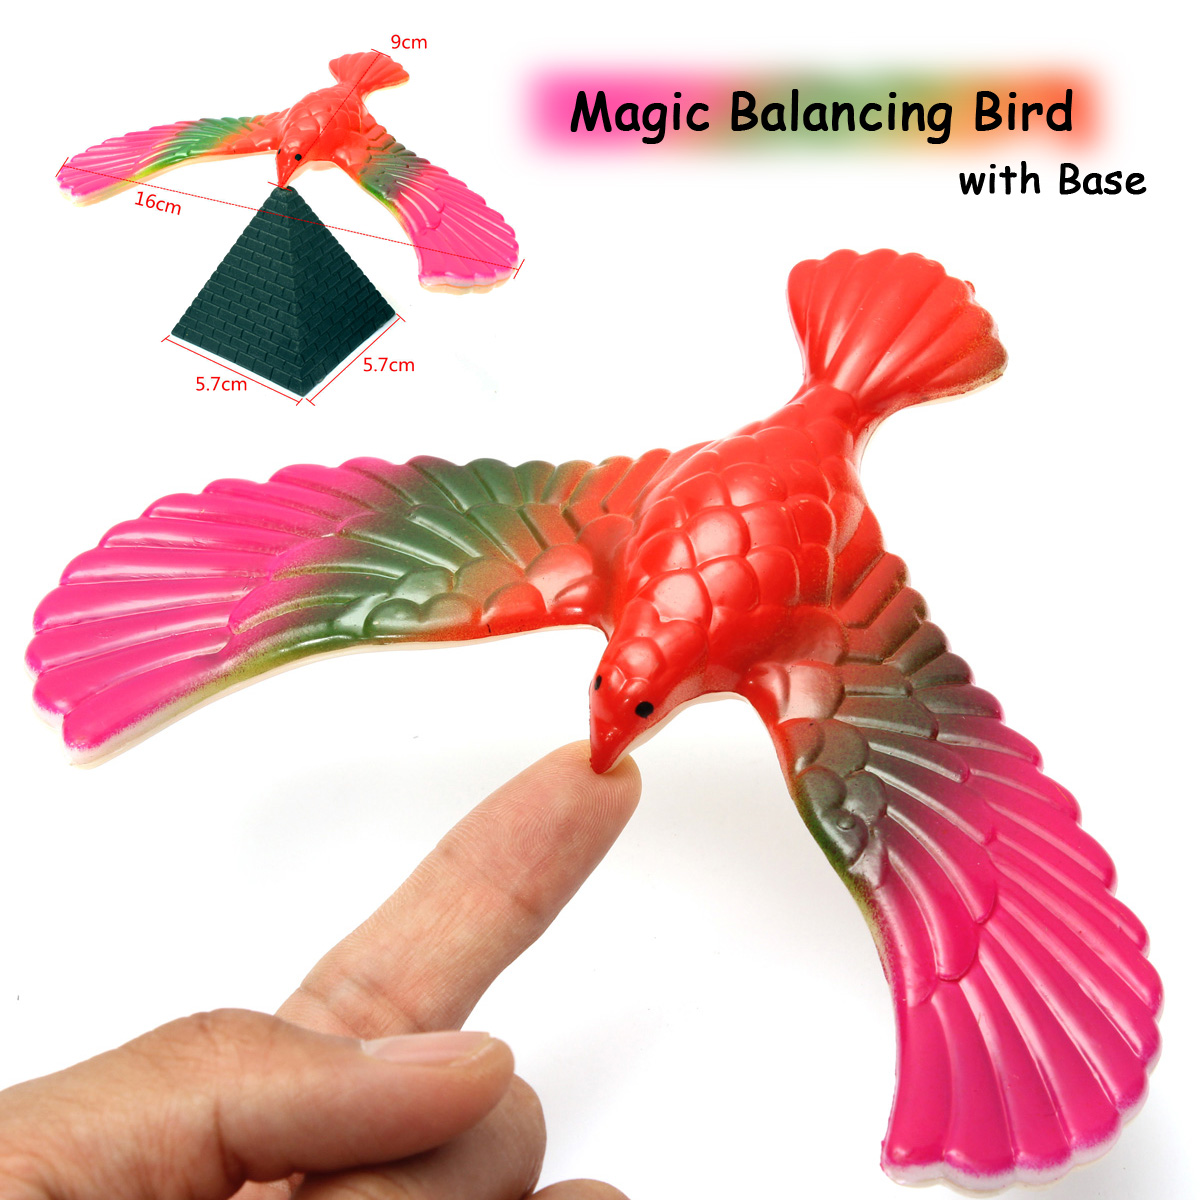 2x Magic Balancing Bird Science Desk Toy Novelty Fun Learning Gag Gift 4color 